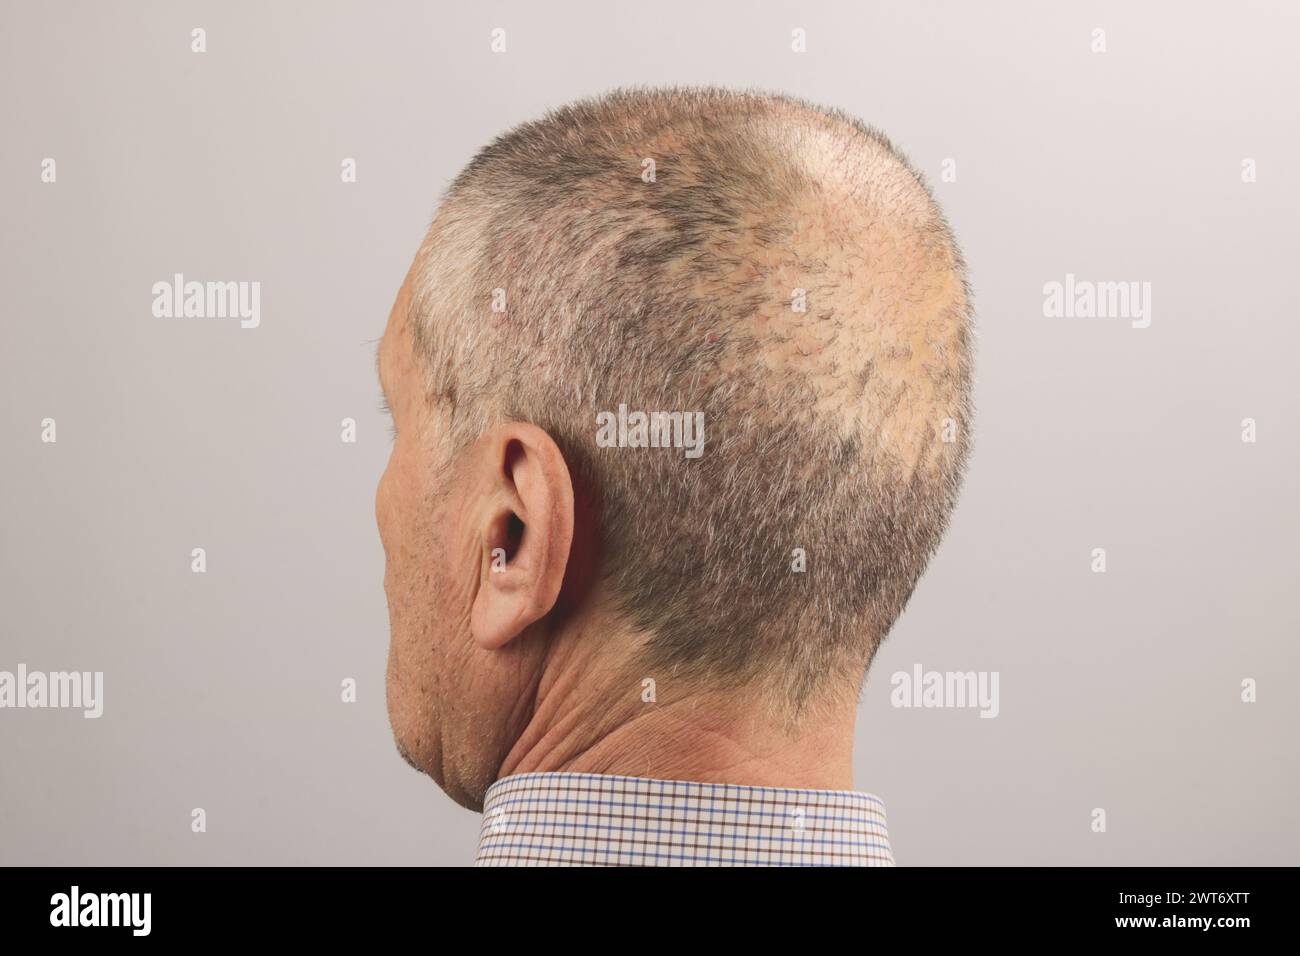 view of a man's head with hair transplant surgery area, two week after the transplant Stock Photo